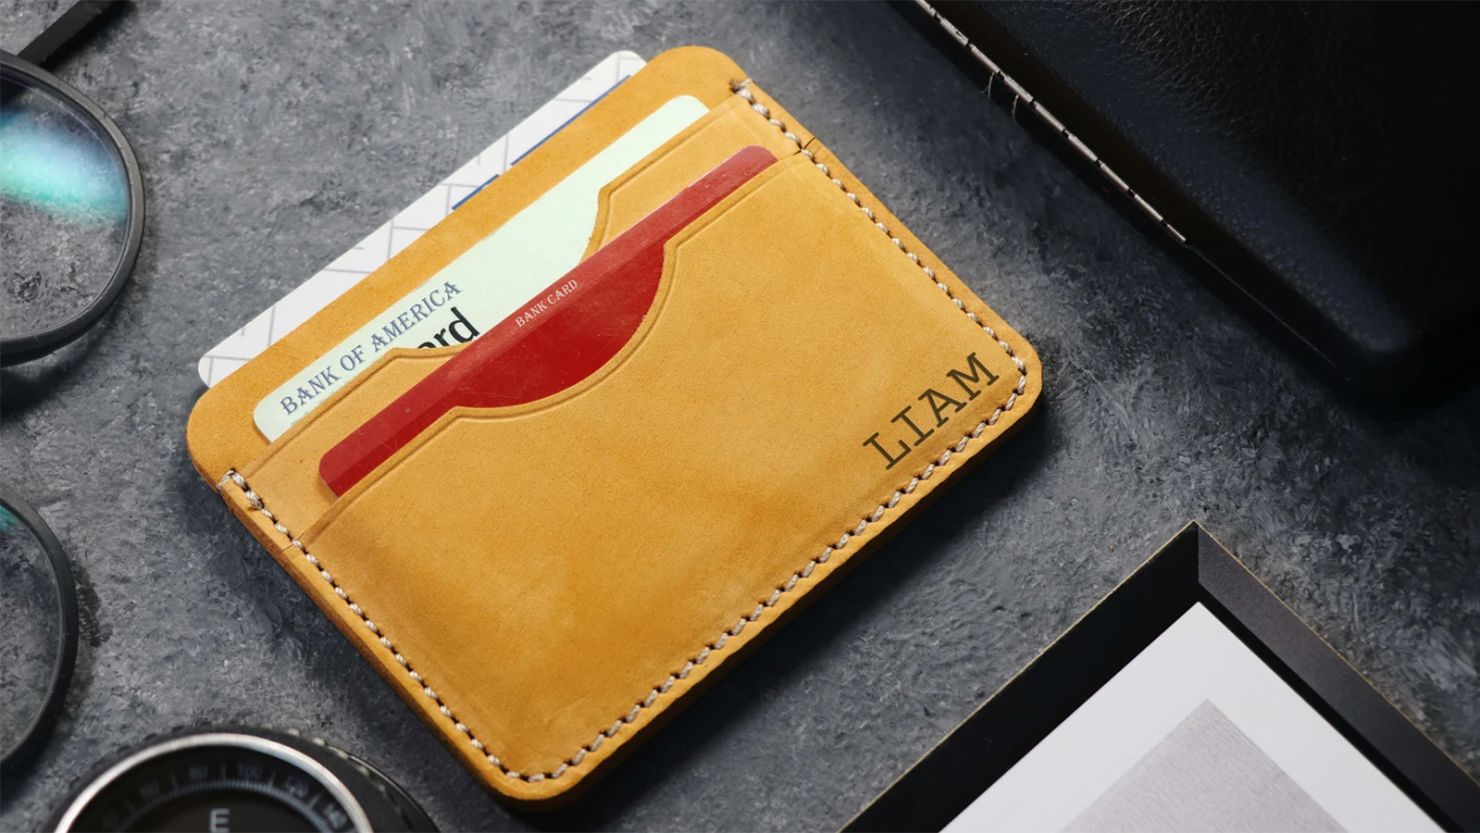 42 Memorable Corporate Gifts Your Co-Workers Will Love